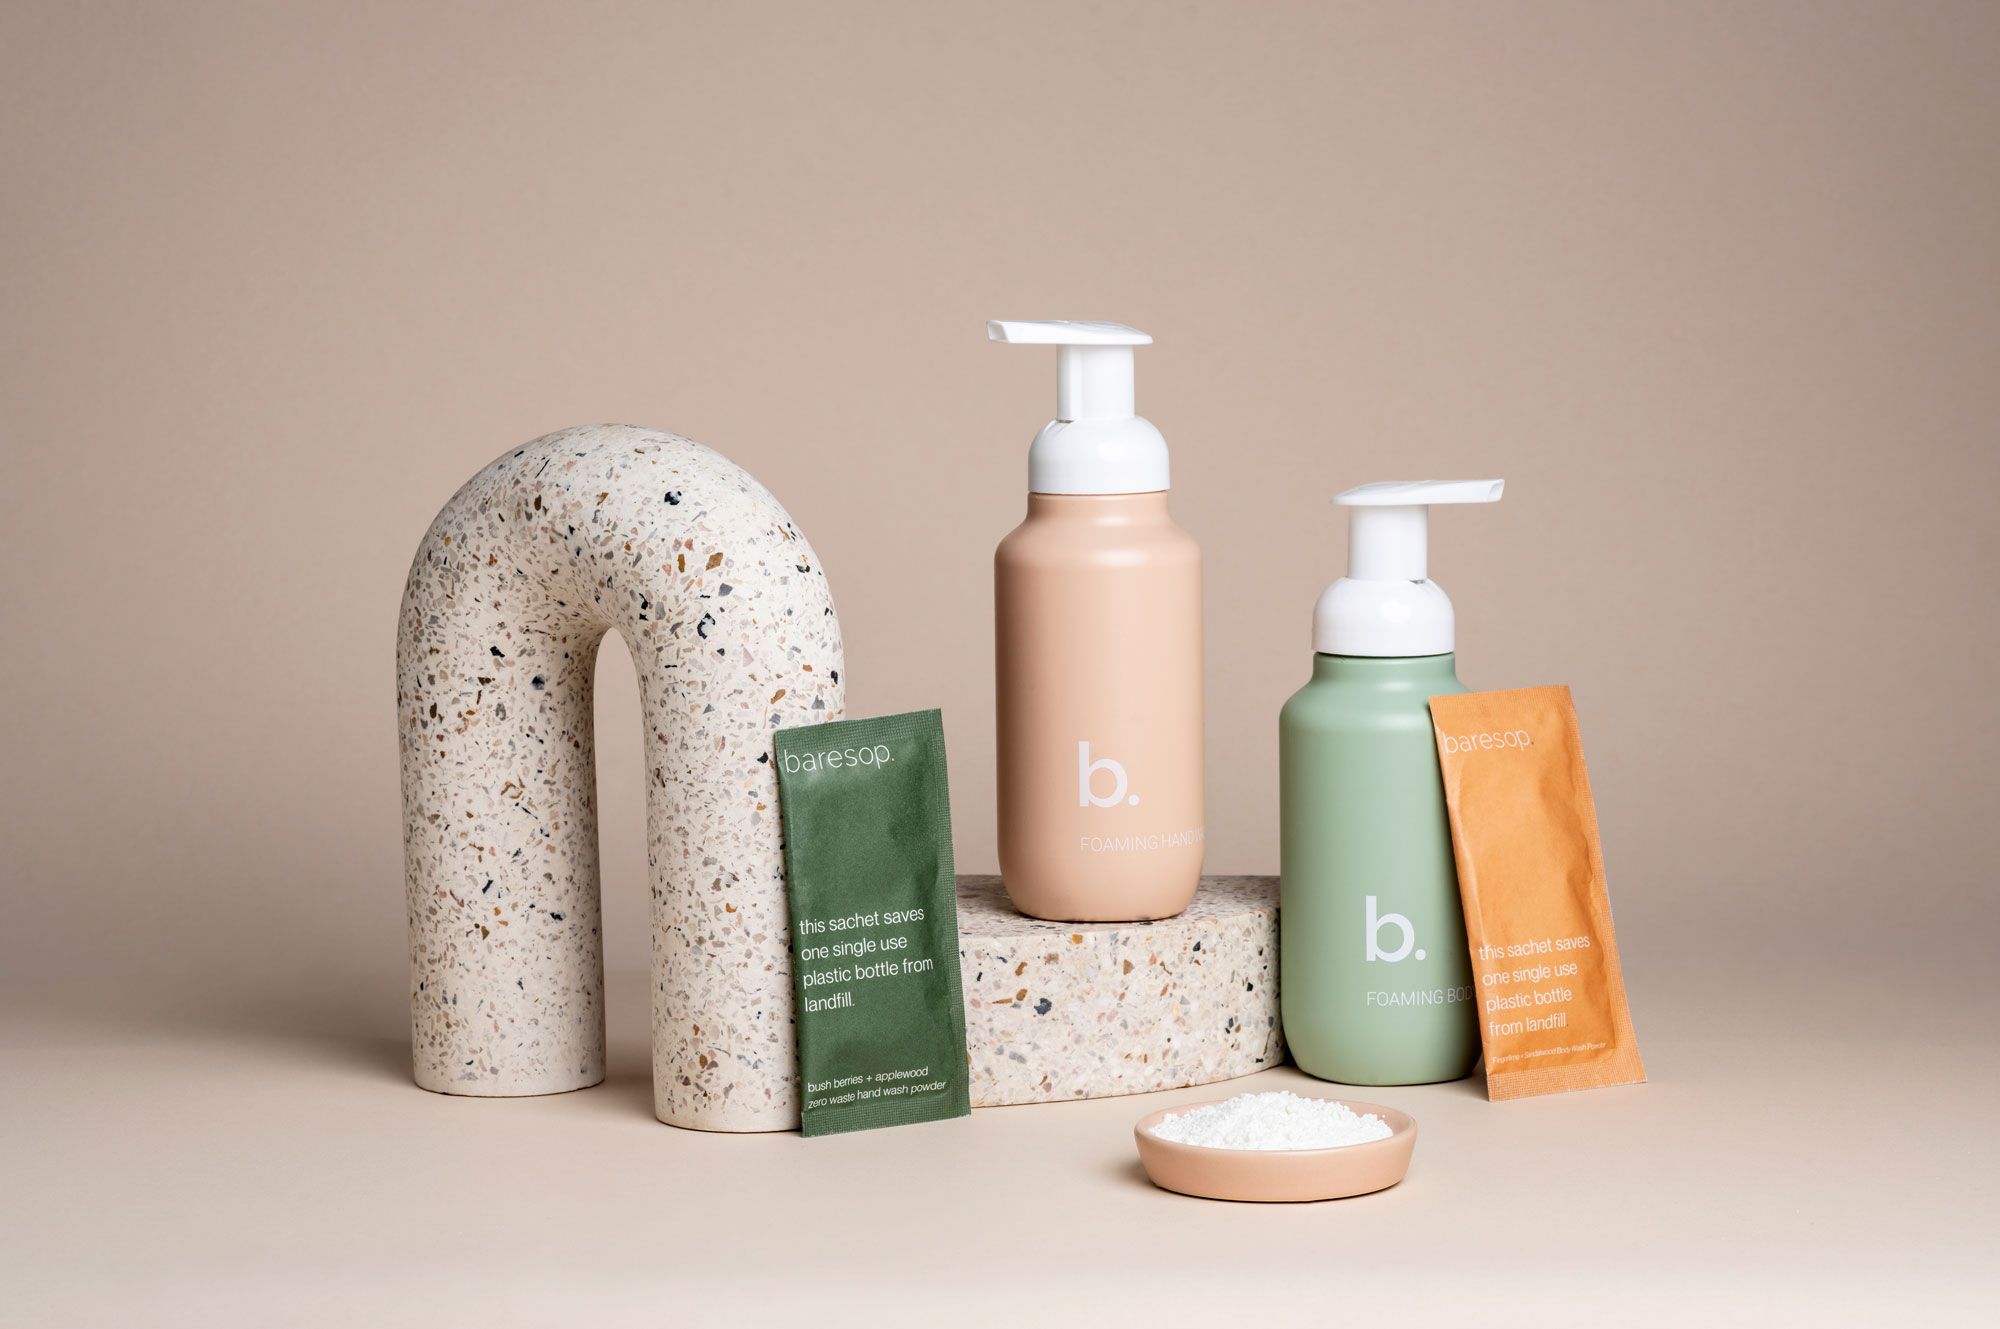 An image of a range of baresop soap products